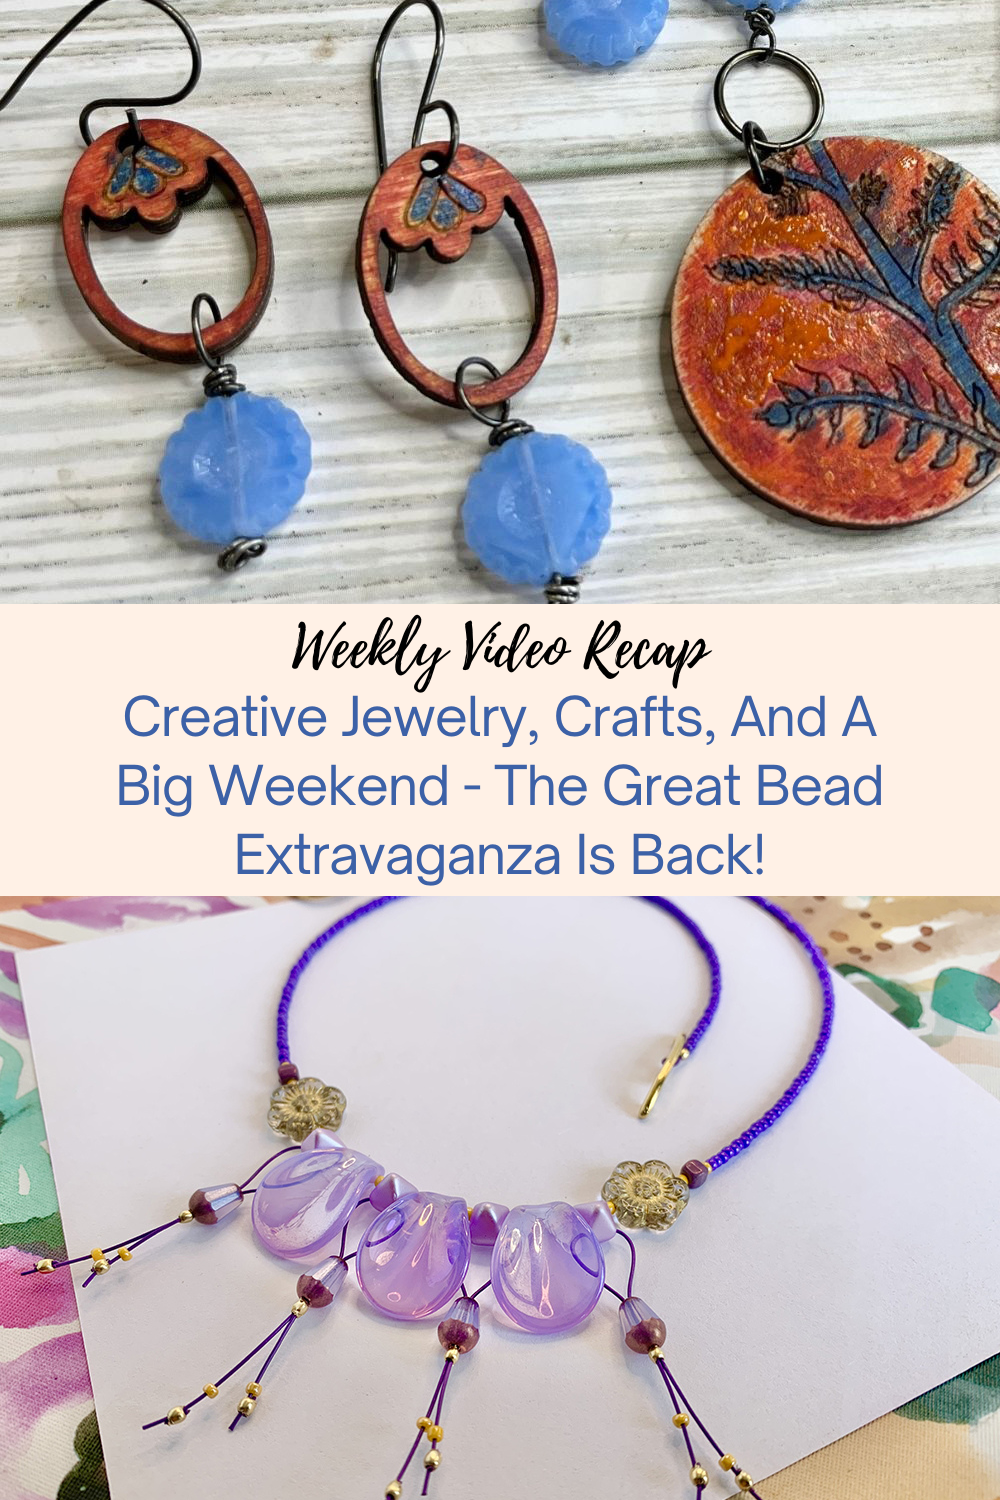 Creative Jewelry, Crafts, And A Big Weekend - The Great Bead Extravaganza Is Back! Collage